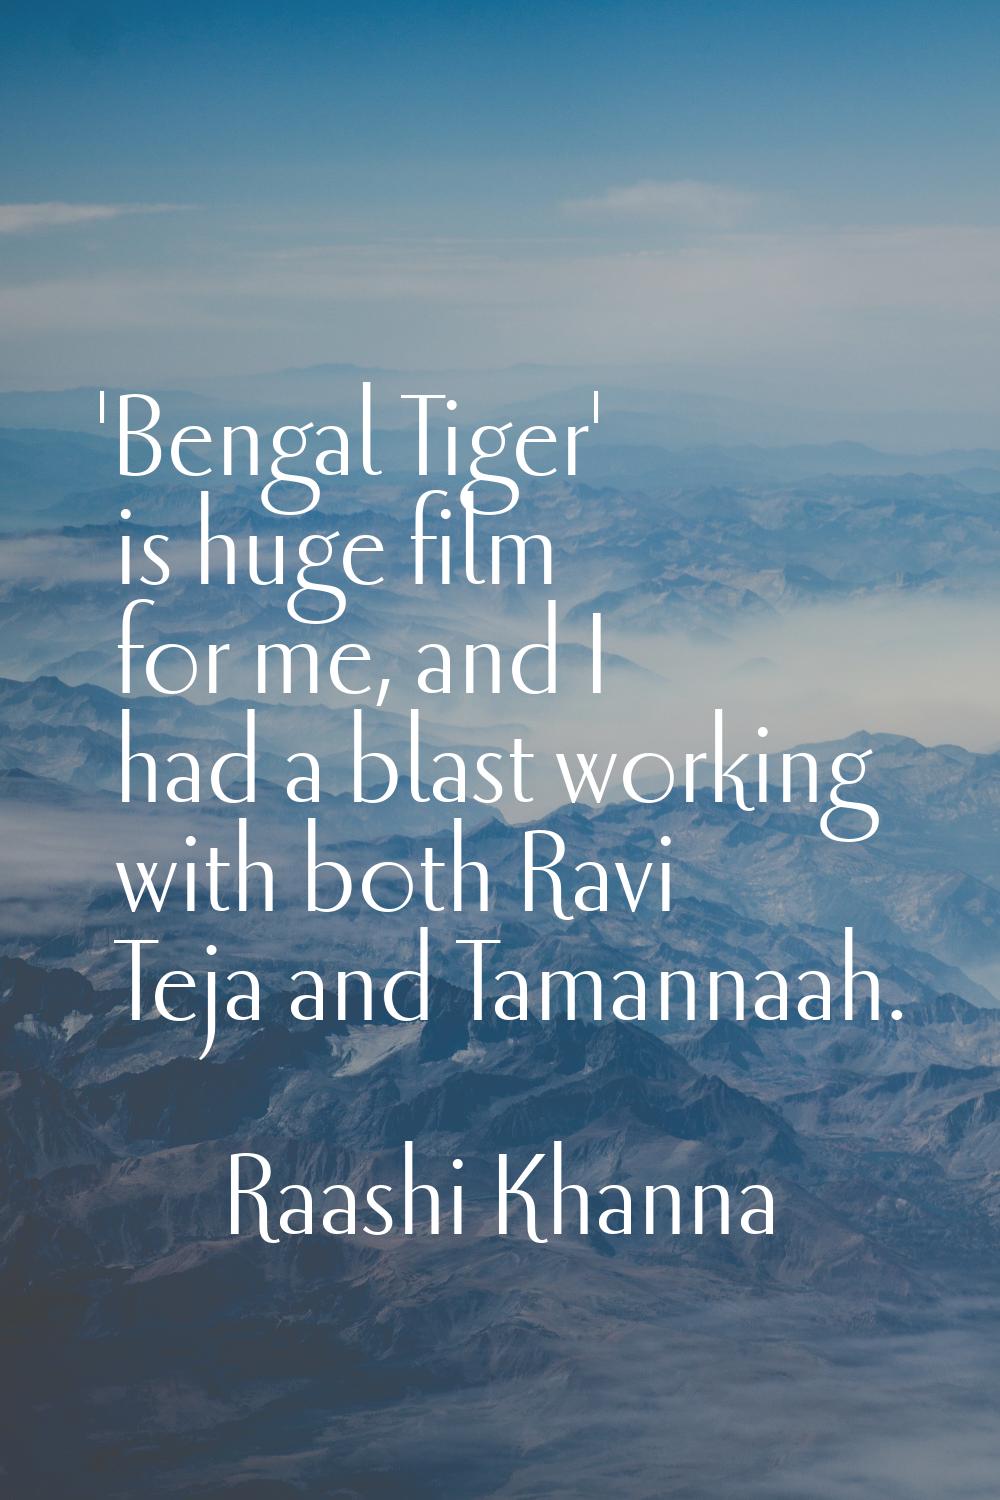 'Bengal Tiger' is huge film for me, and I had a blast working with both Ravi Teja and Tamannaah.